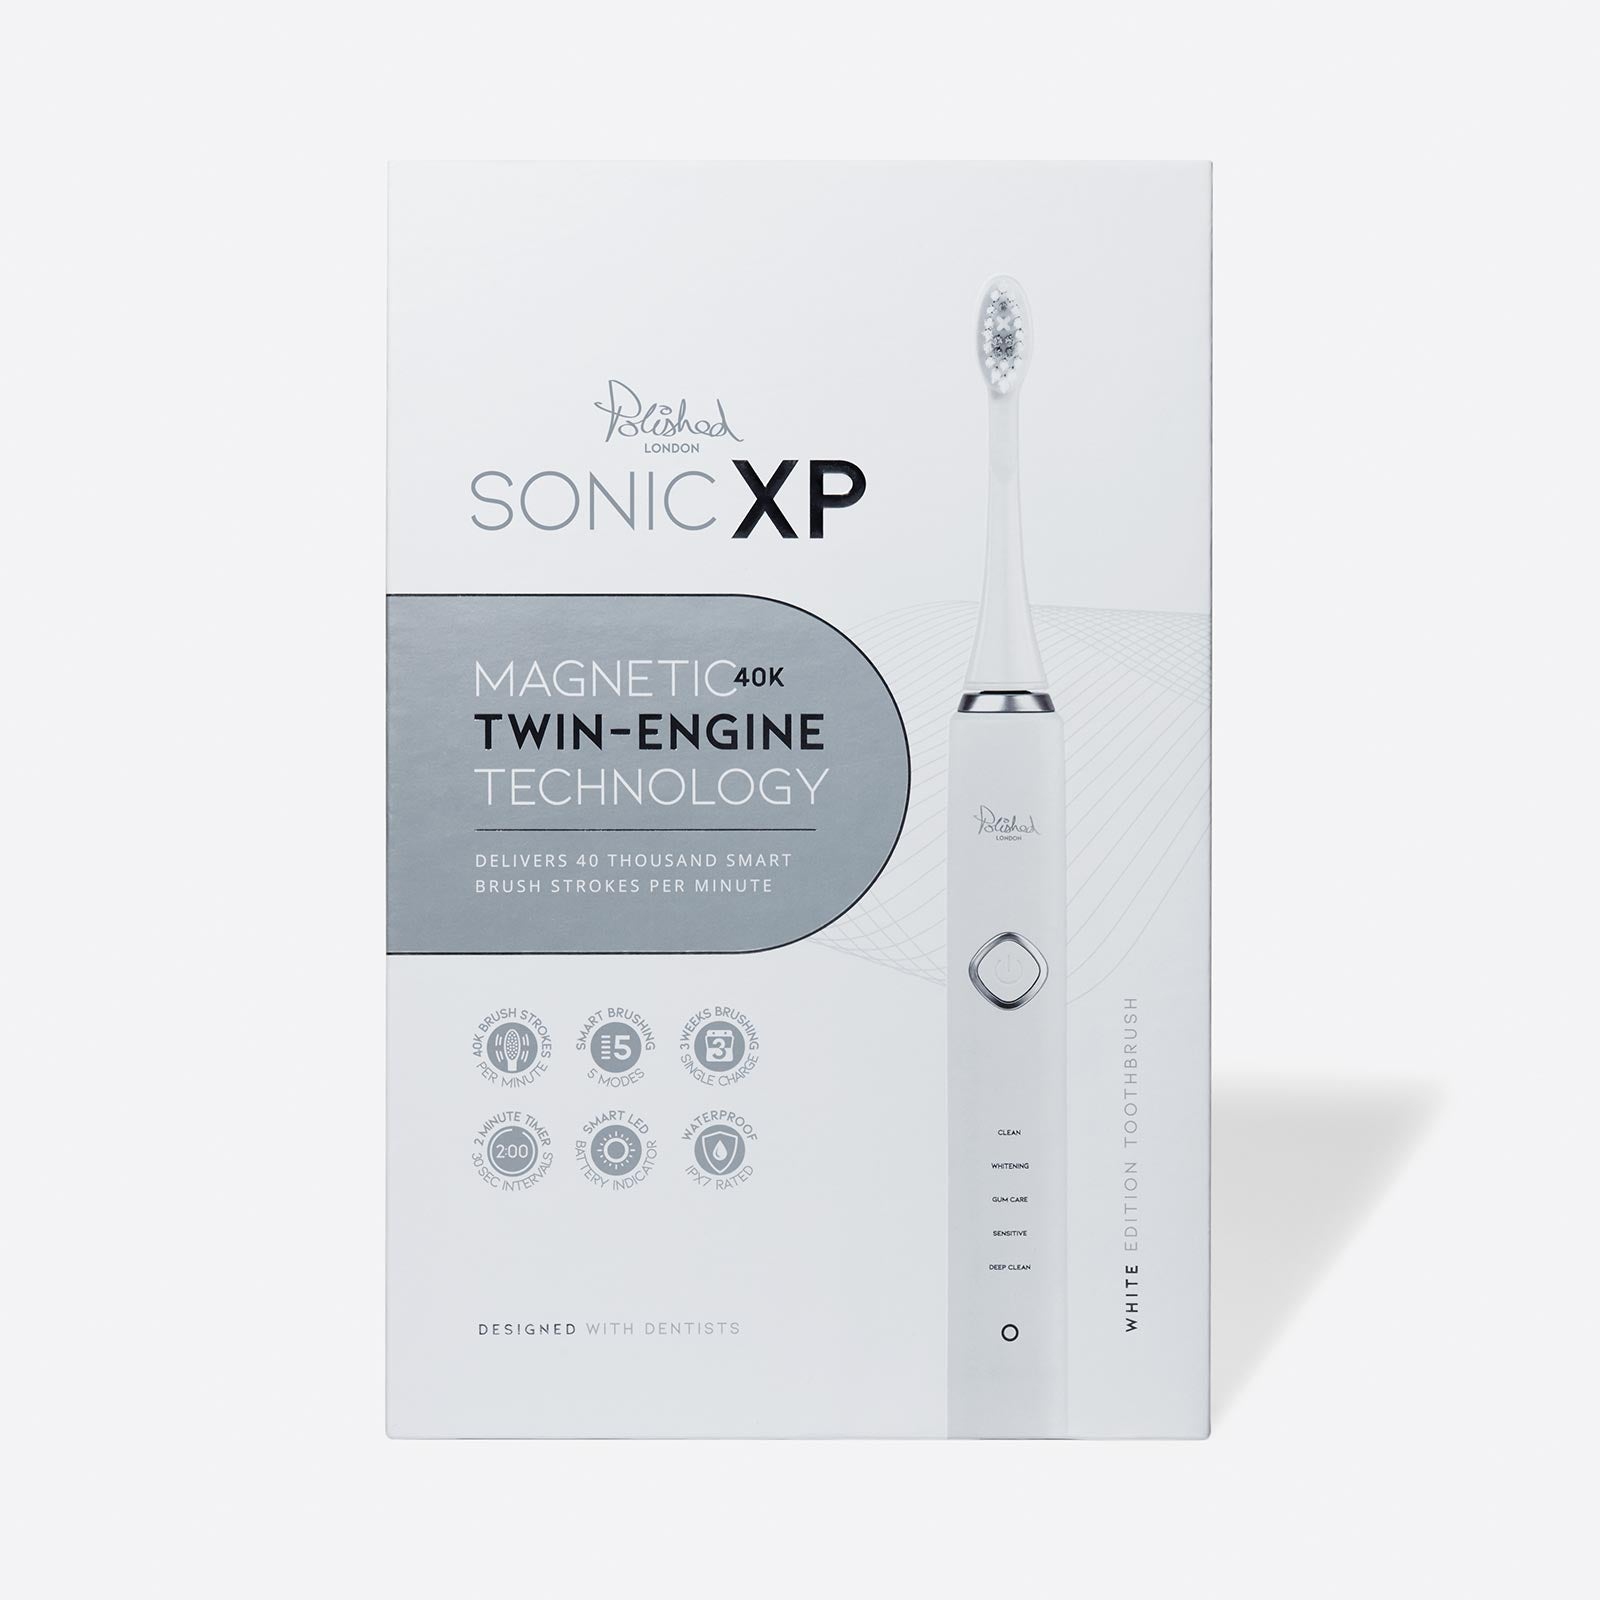 The Polished London Sonic XP Toothbrush box in white